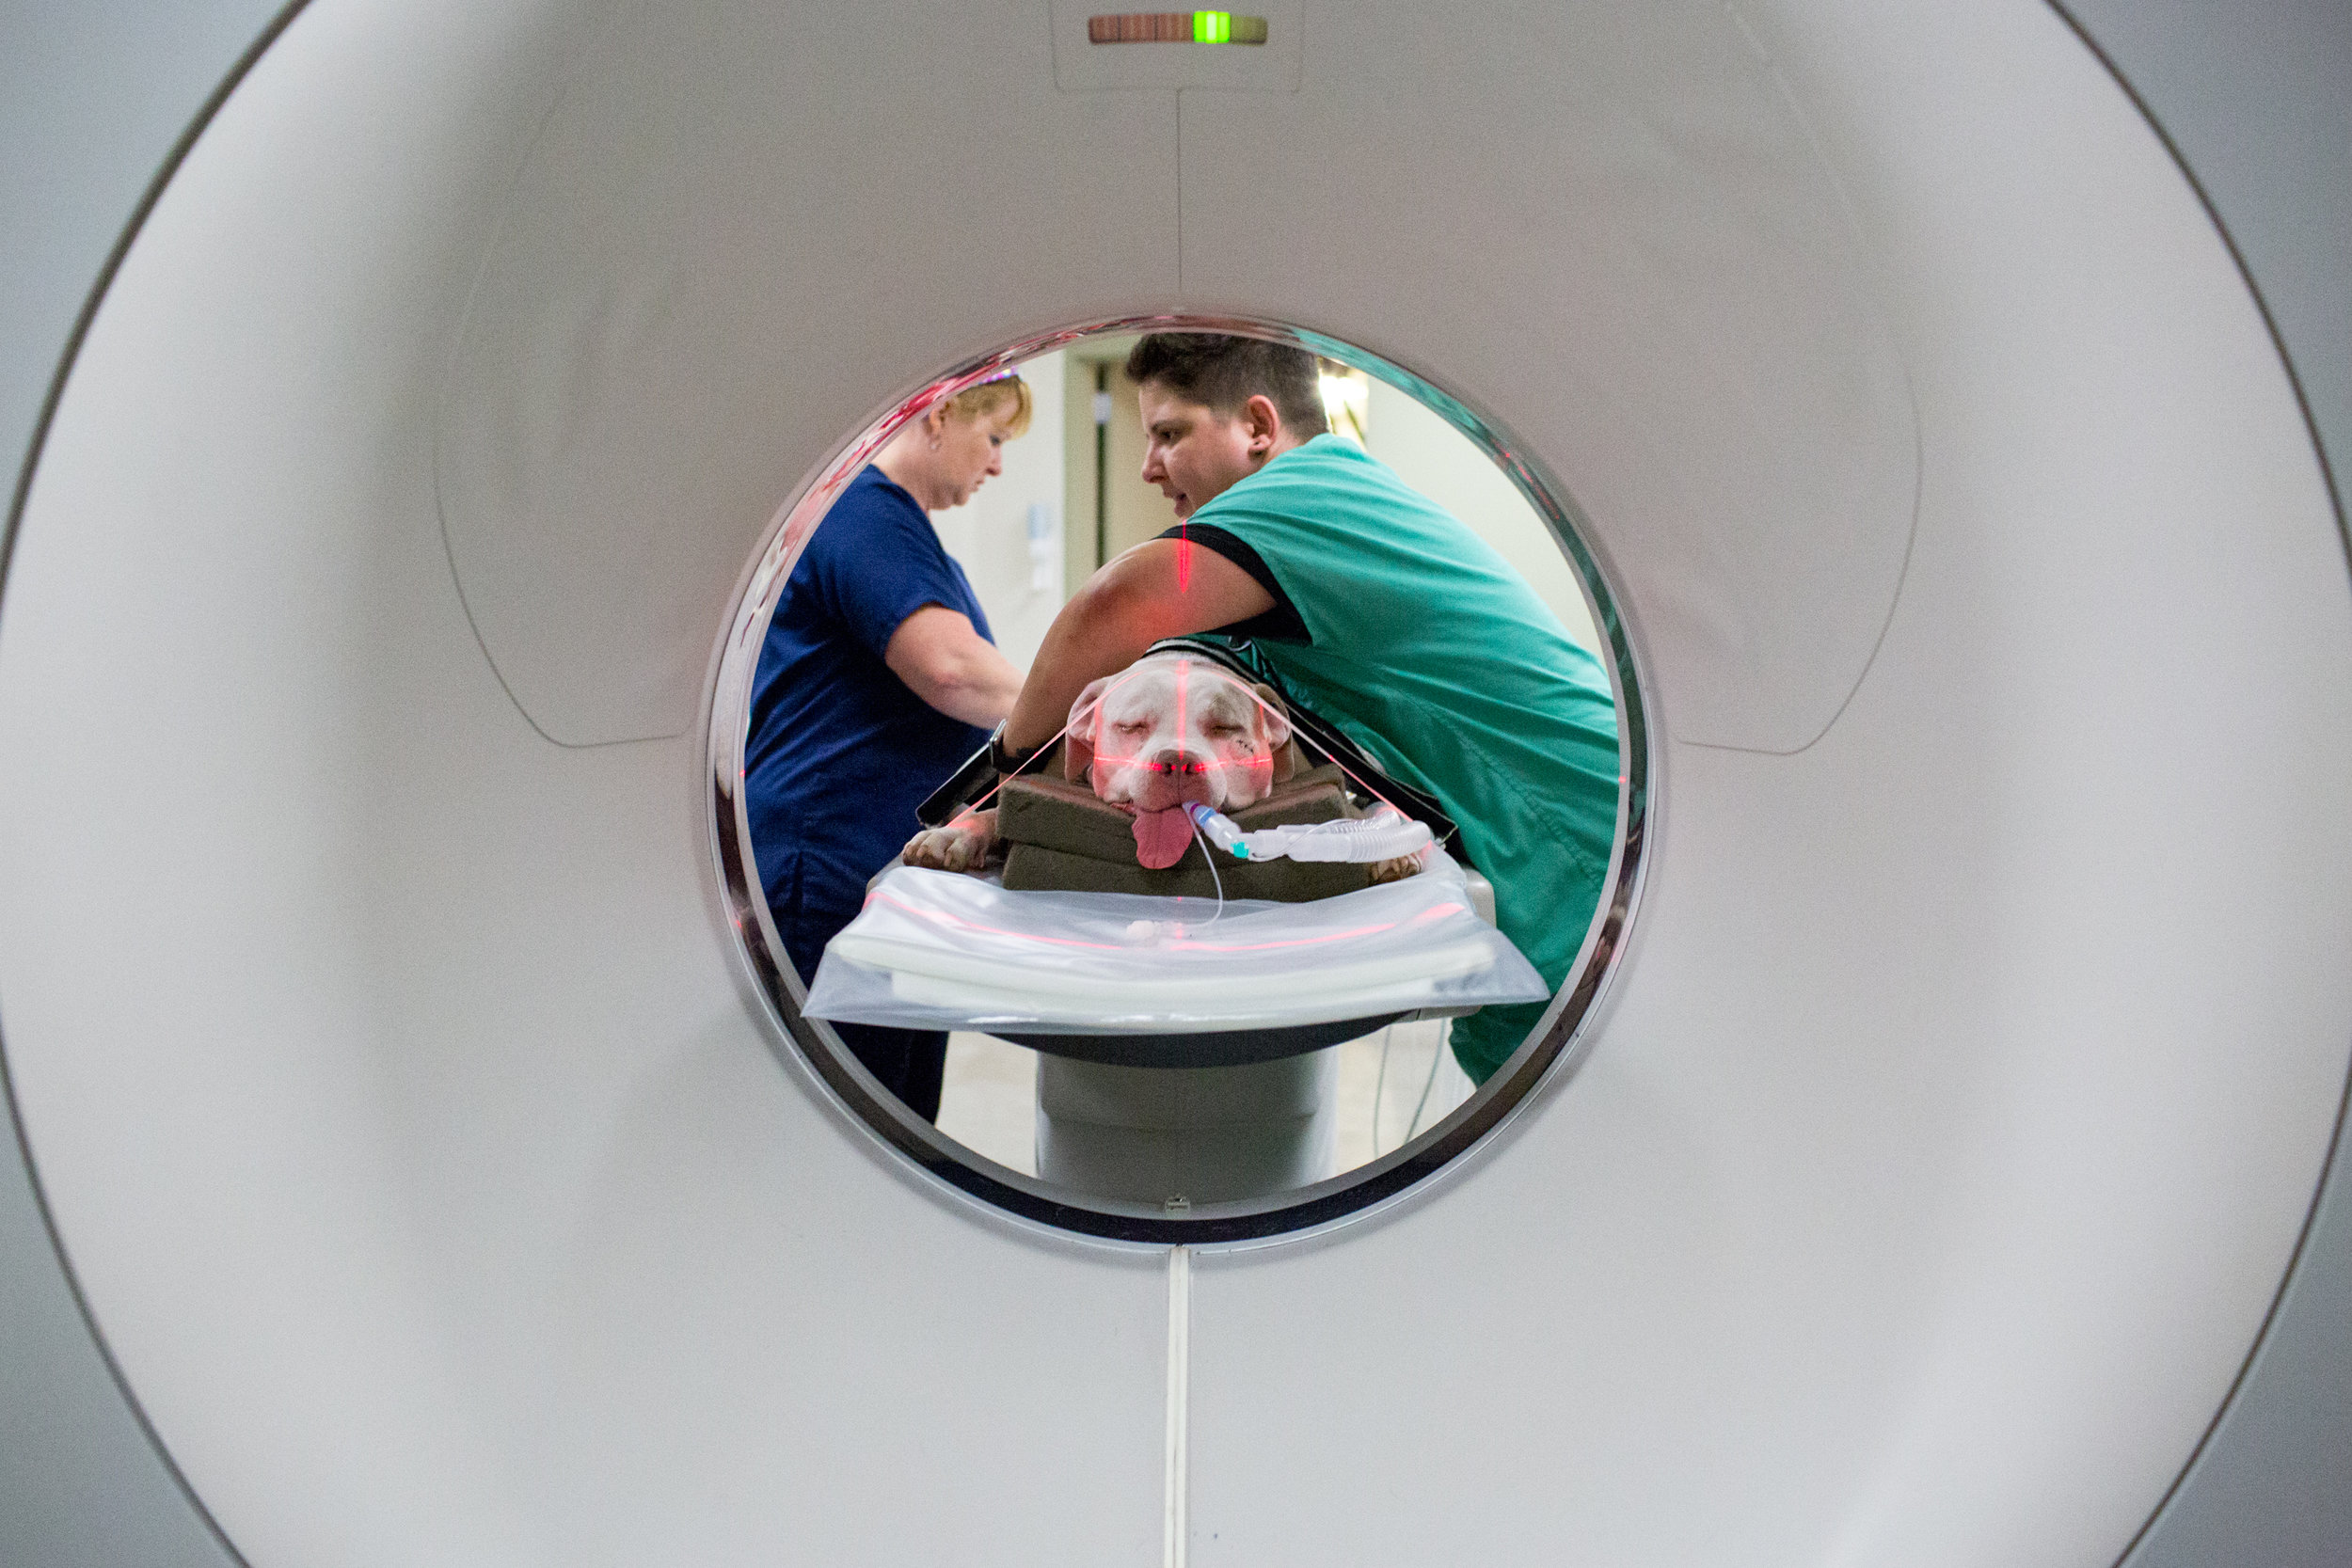  CVT Carey Holt (left) and CVT Bea Cruz (right) work to position Ciroc properly for his CAT scan, to determine course of treatment at the University of Minnesota Veterinary Medical Center, on Wednesday, July 12, 2017. Jennifer LeMay's two dogs were s